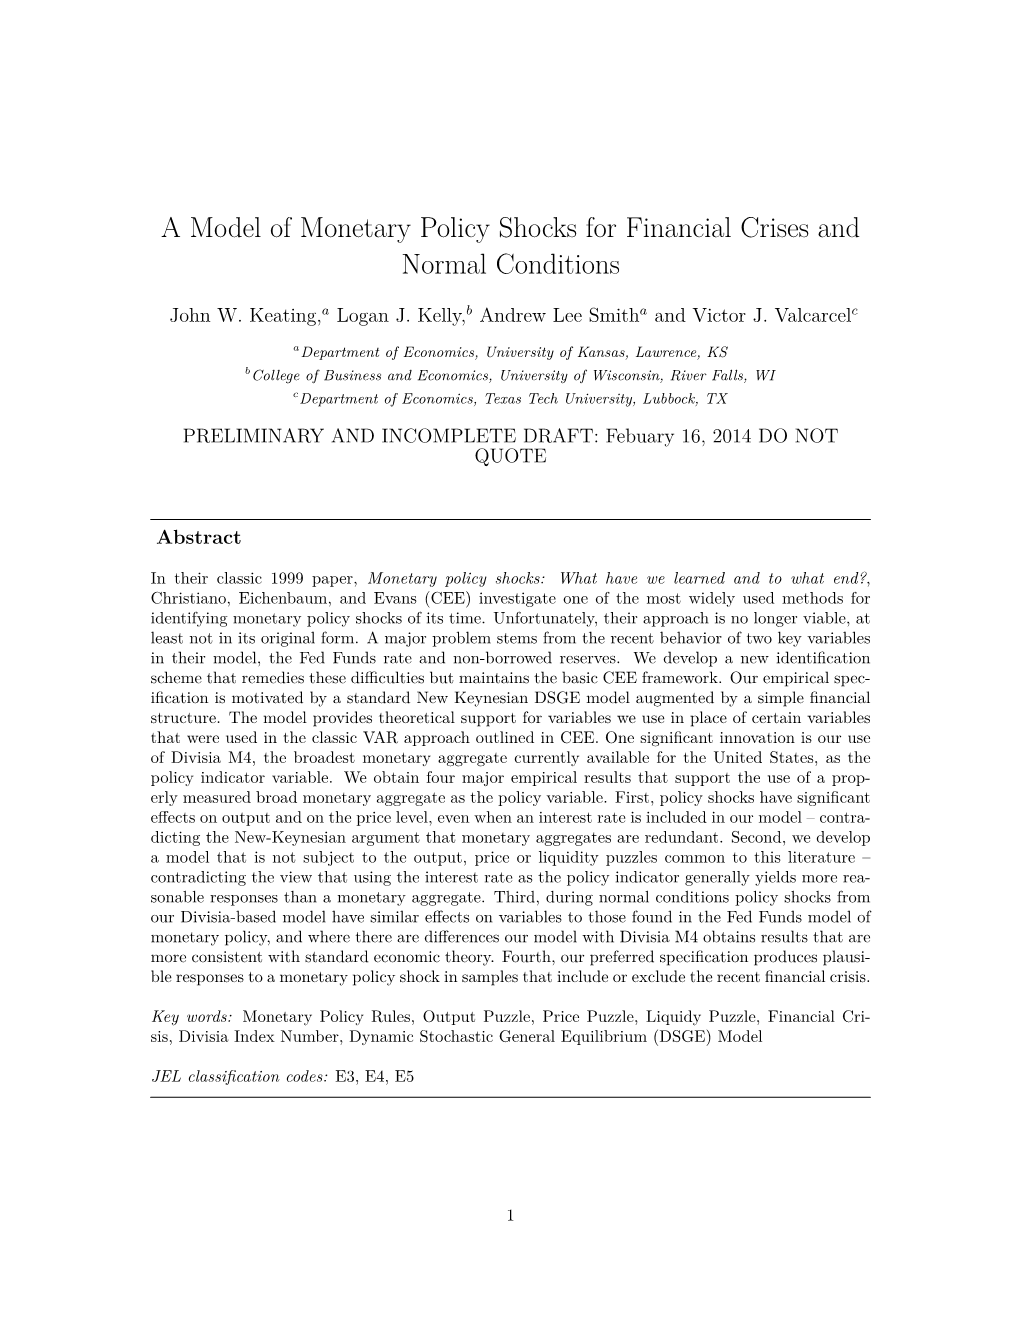 A Model of Monetary Policy Shocks for Financial Crises and Normal Conditions